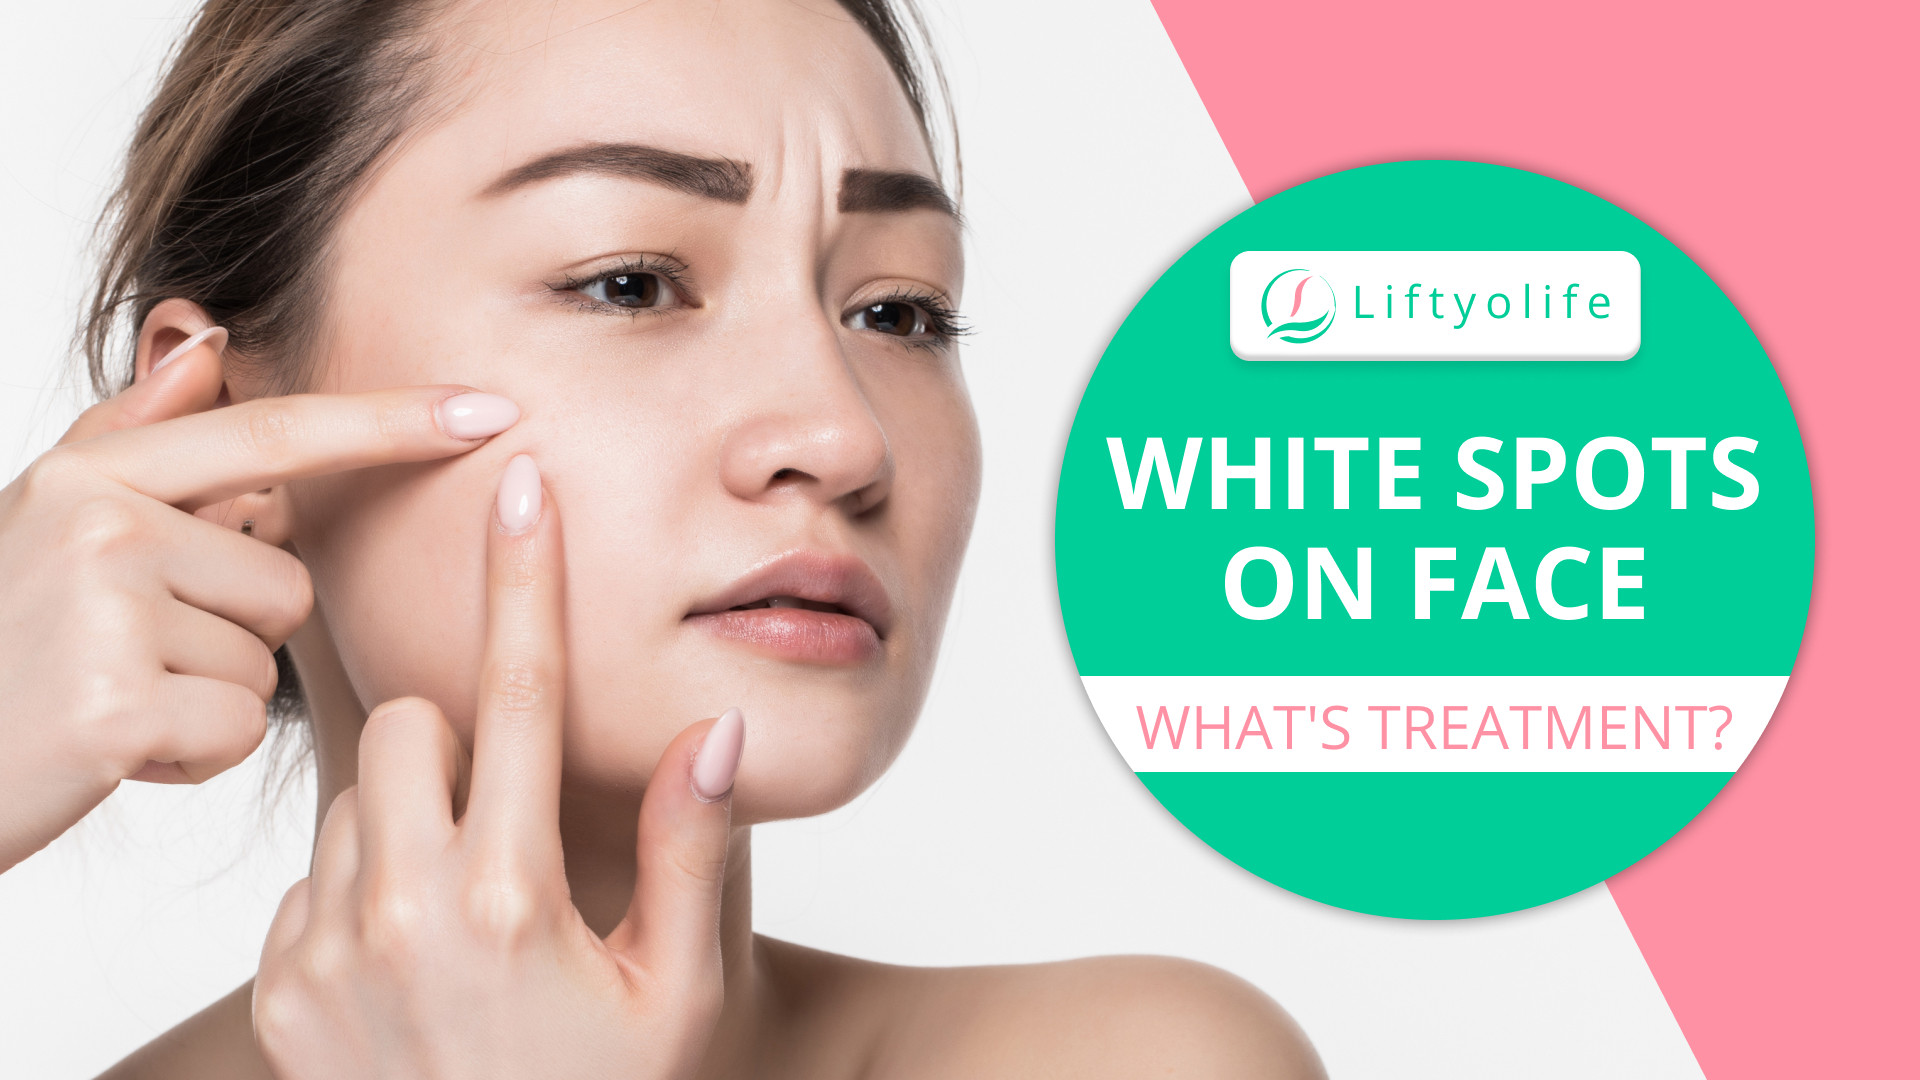 5 Causes Of White Spots On Face & Treatment